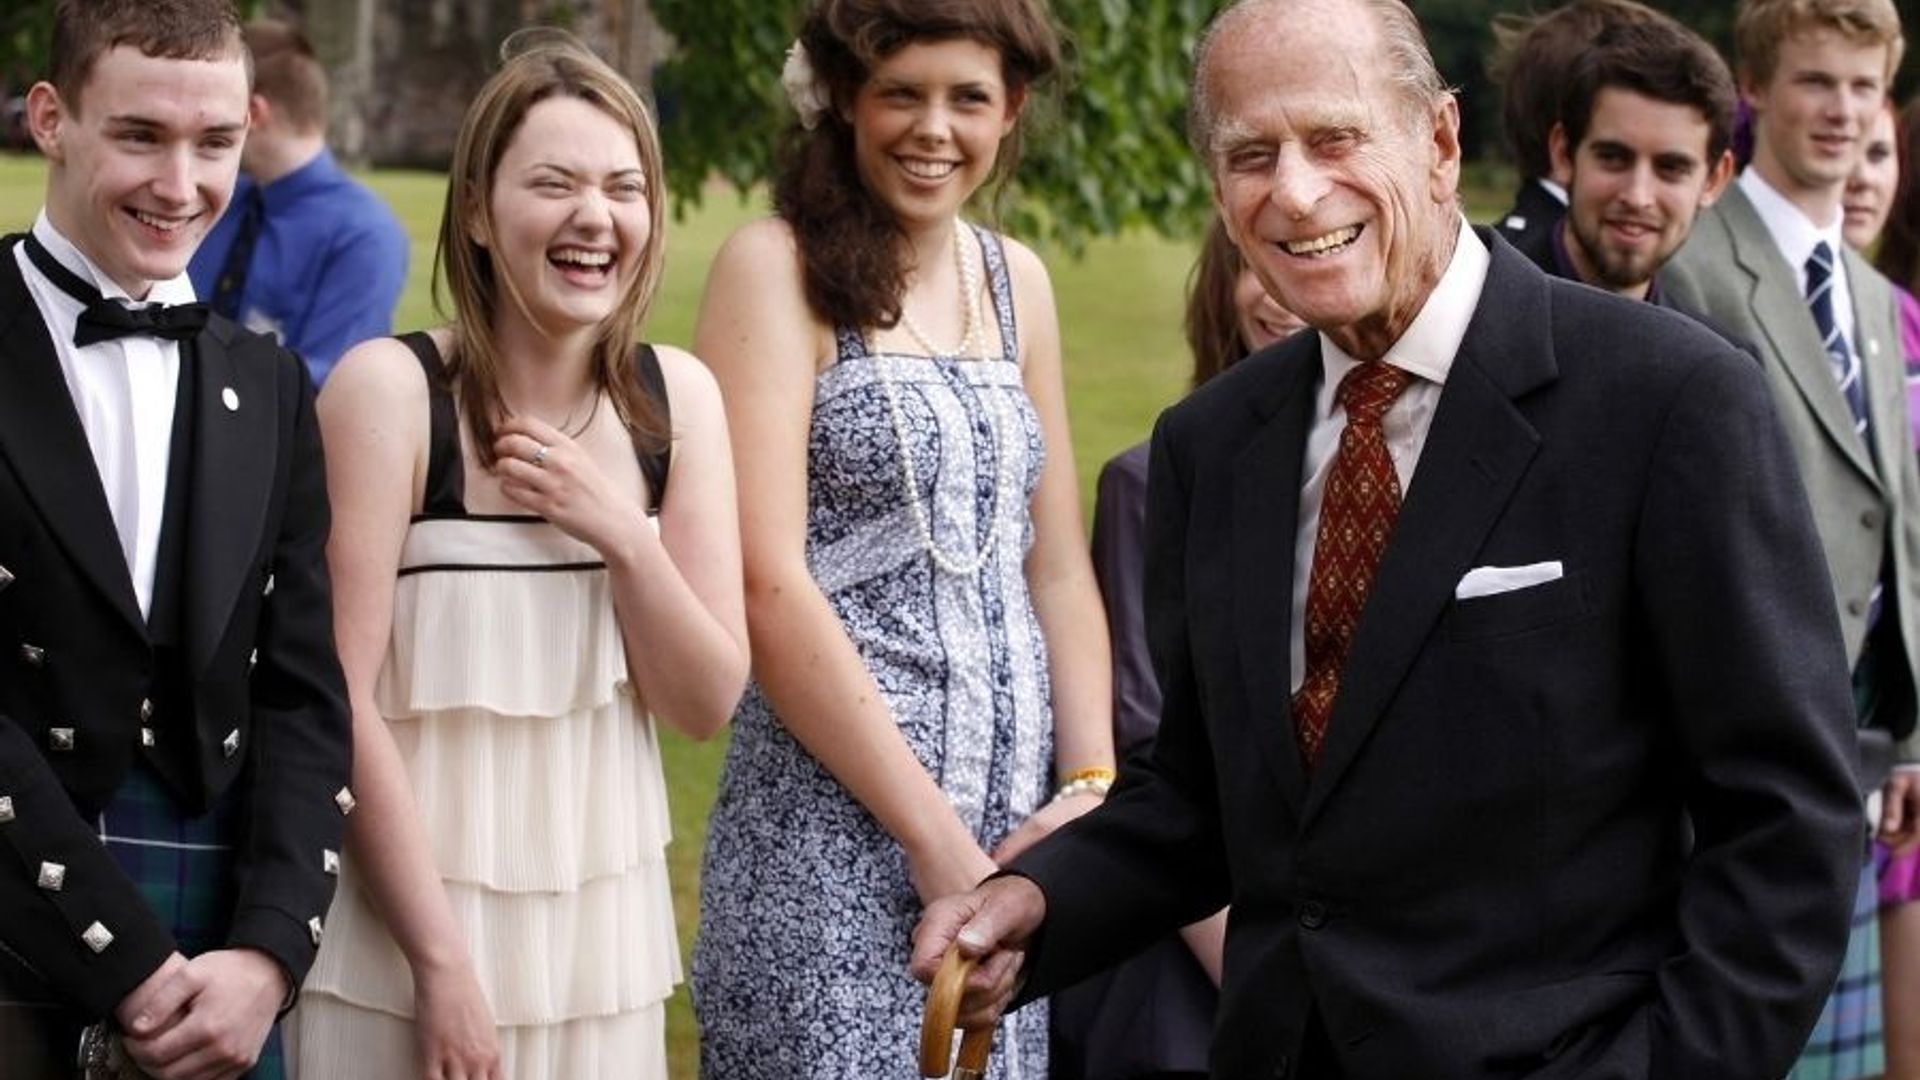 Did you meet Prince Philip? Is there something about him you'll always love? Share your memories with us